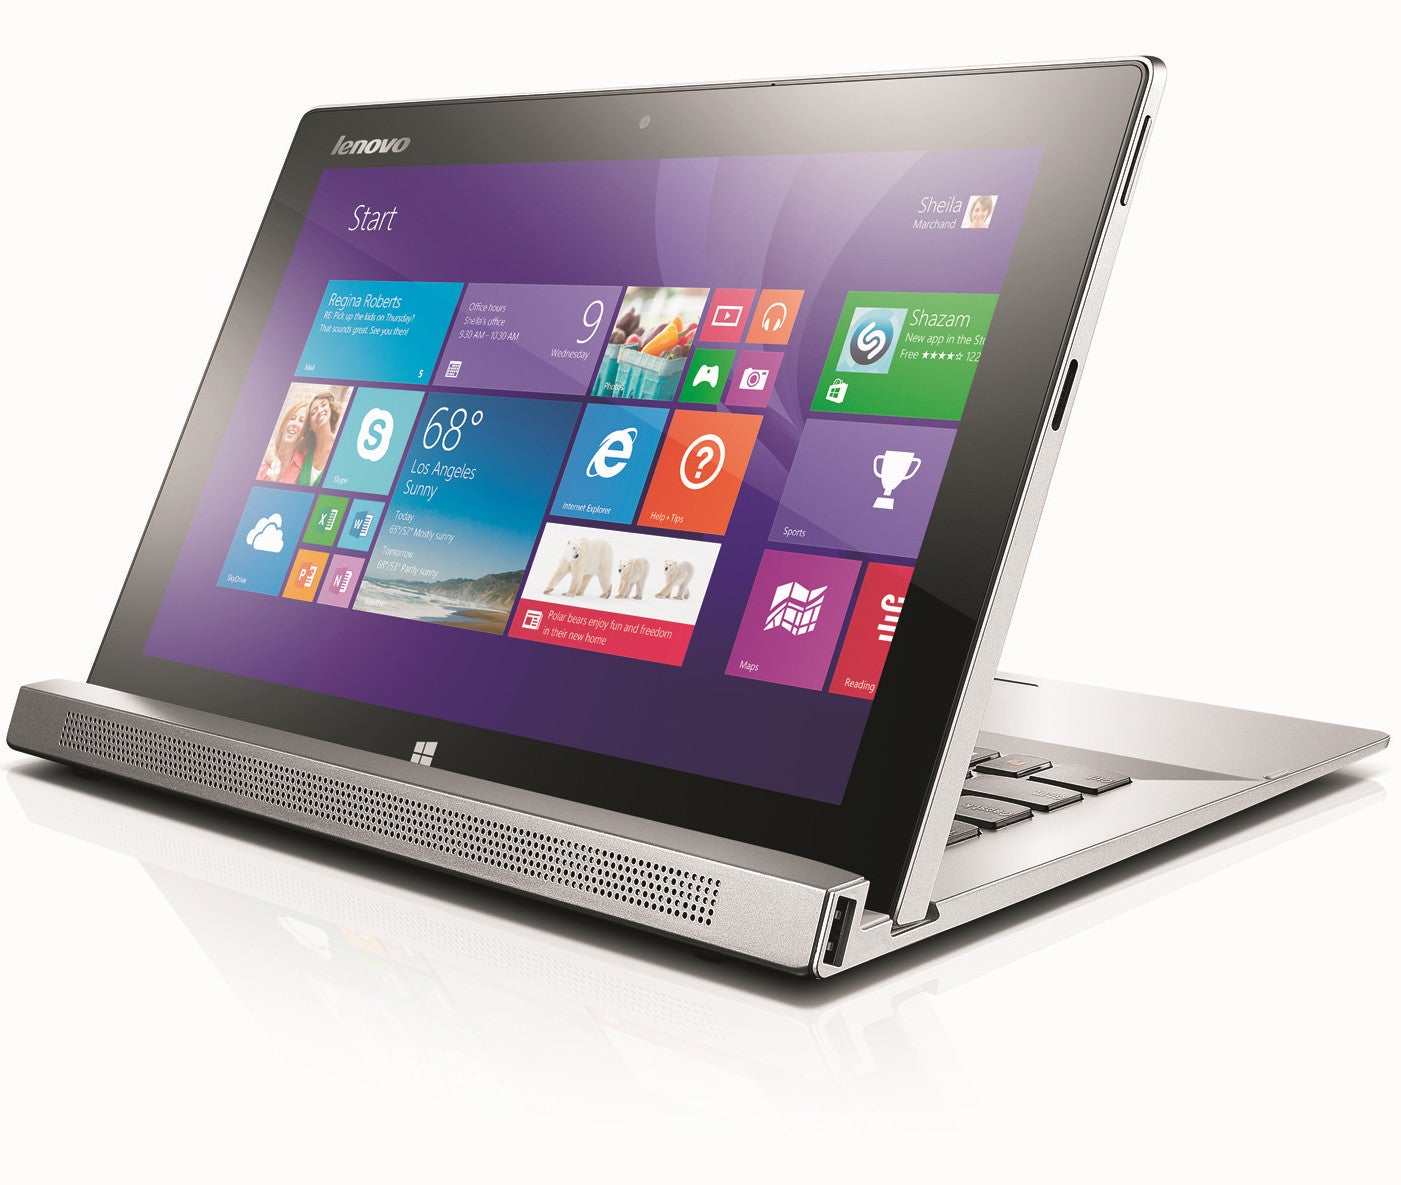 The 11.6&#039;&#039; Lenovo Miix 2 - Lenovo details new 10.1&#039;&#039; and 11.6&#039;&#039; Win 8.1 convertibles with an Intel heart